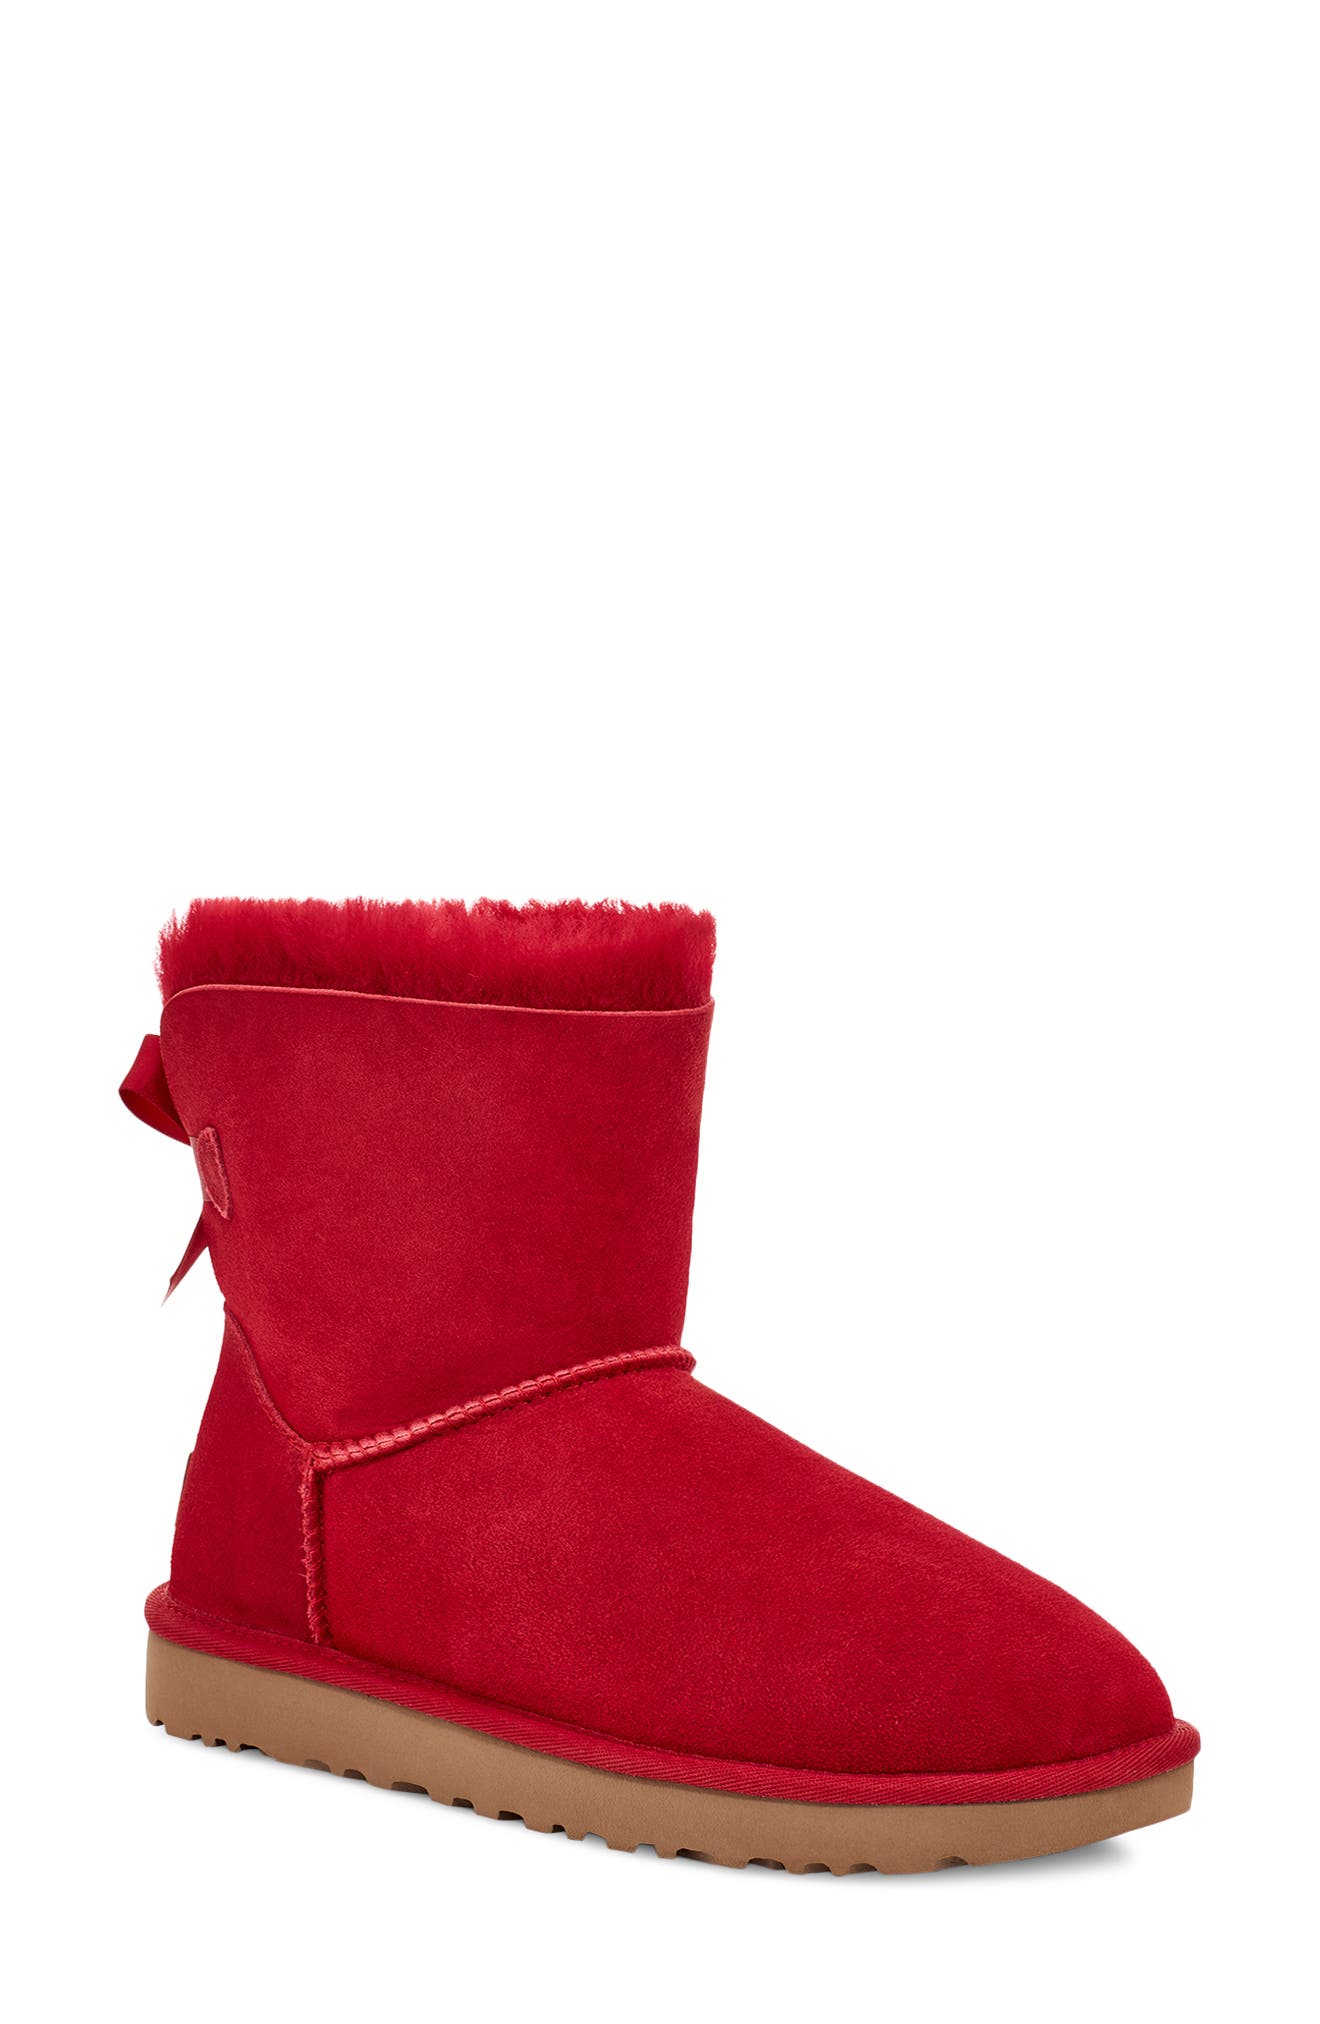 red flat boots womens